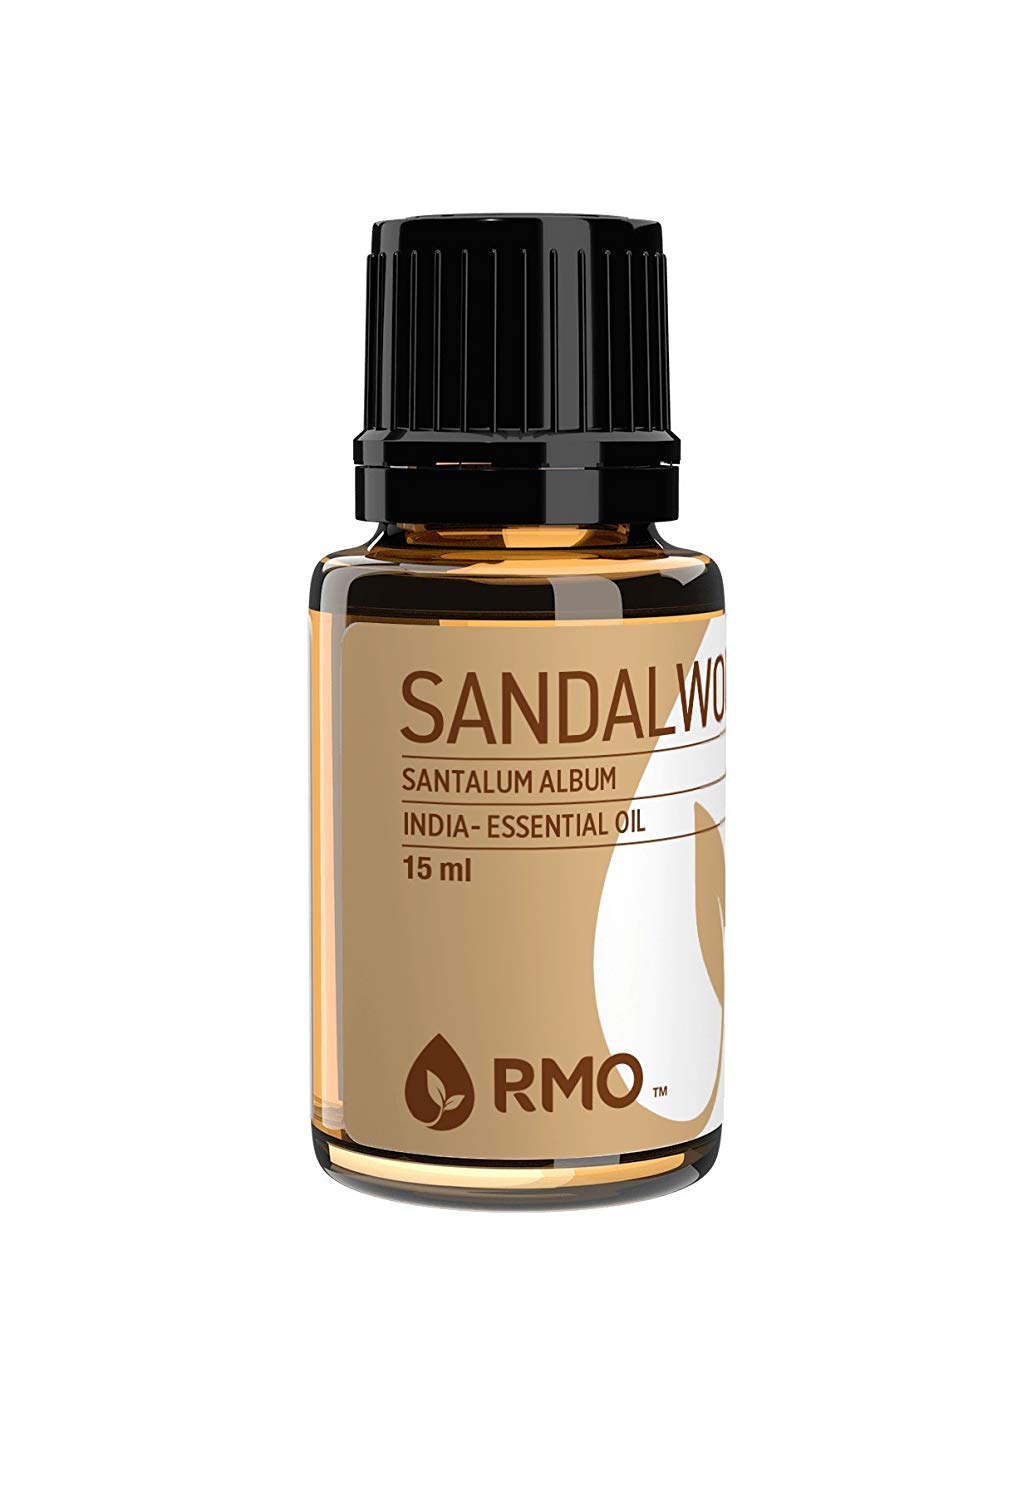 Sandalwood oil benefits for mind and body